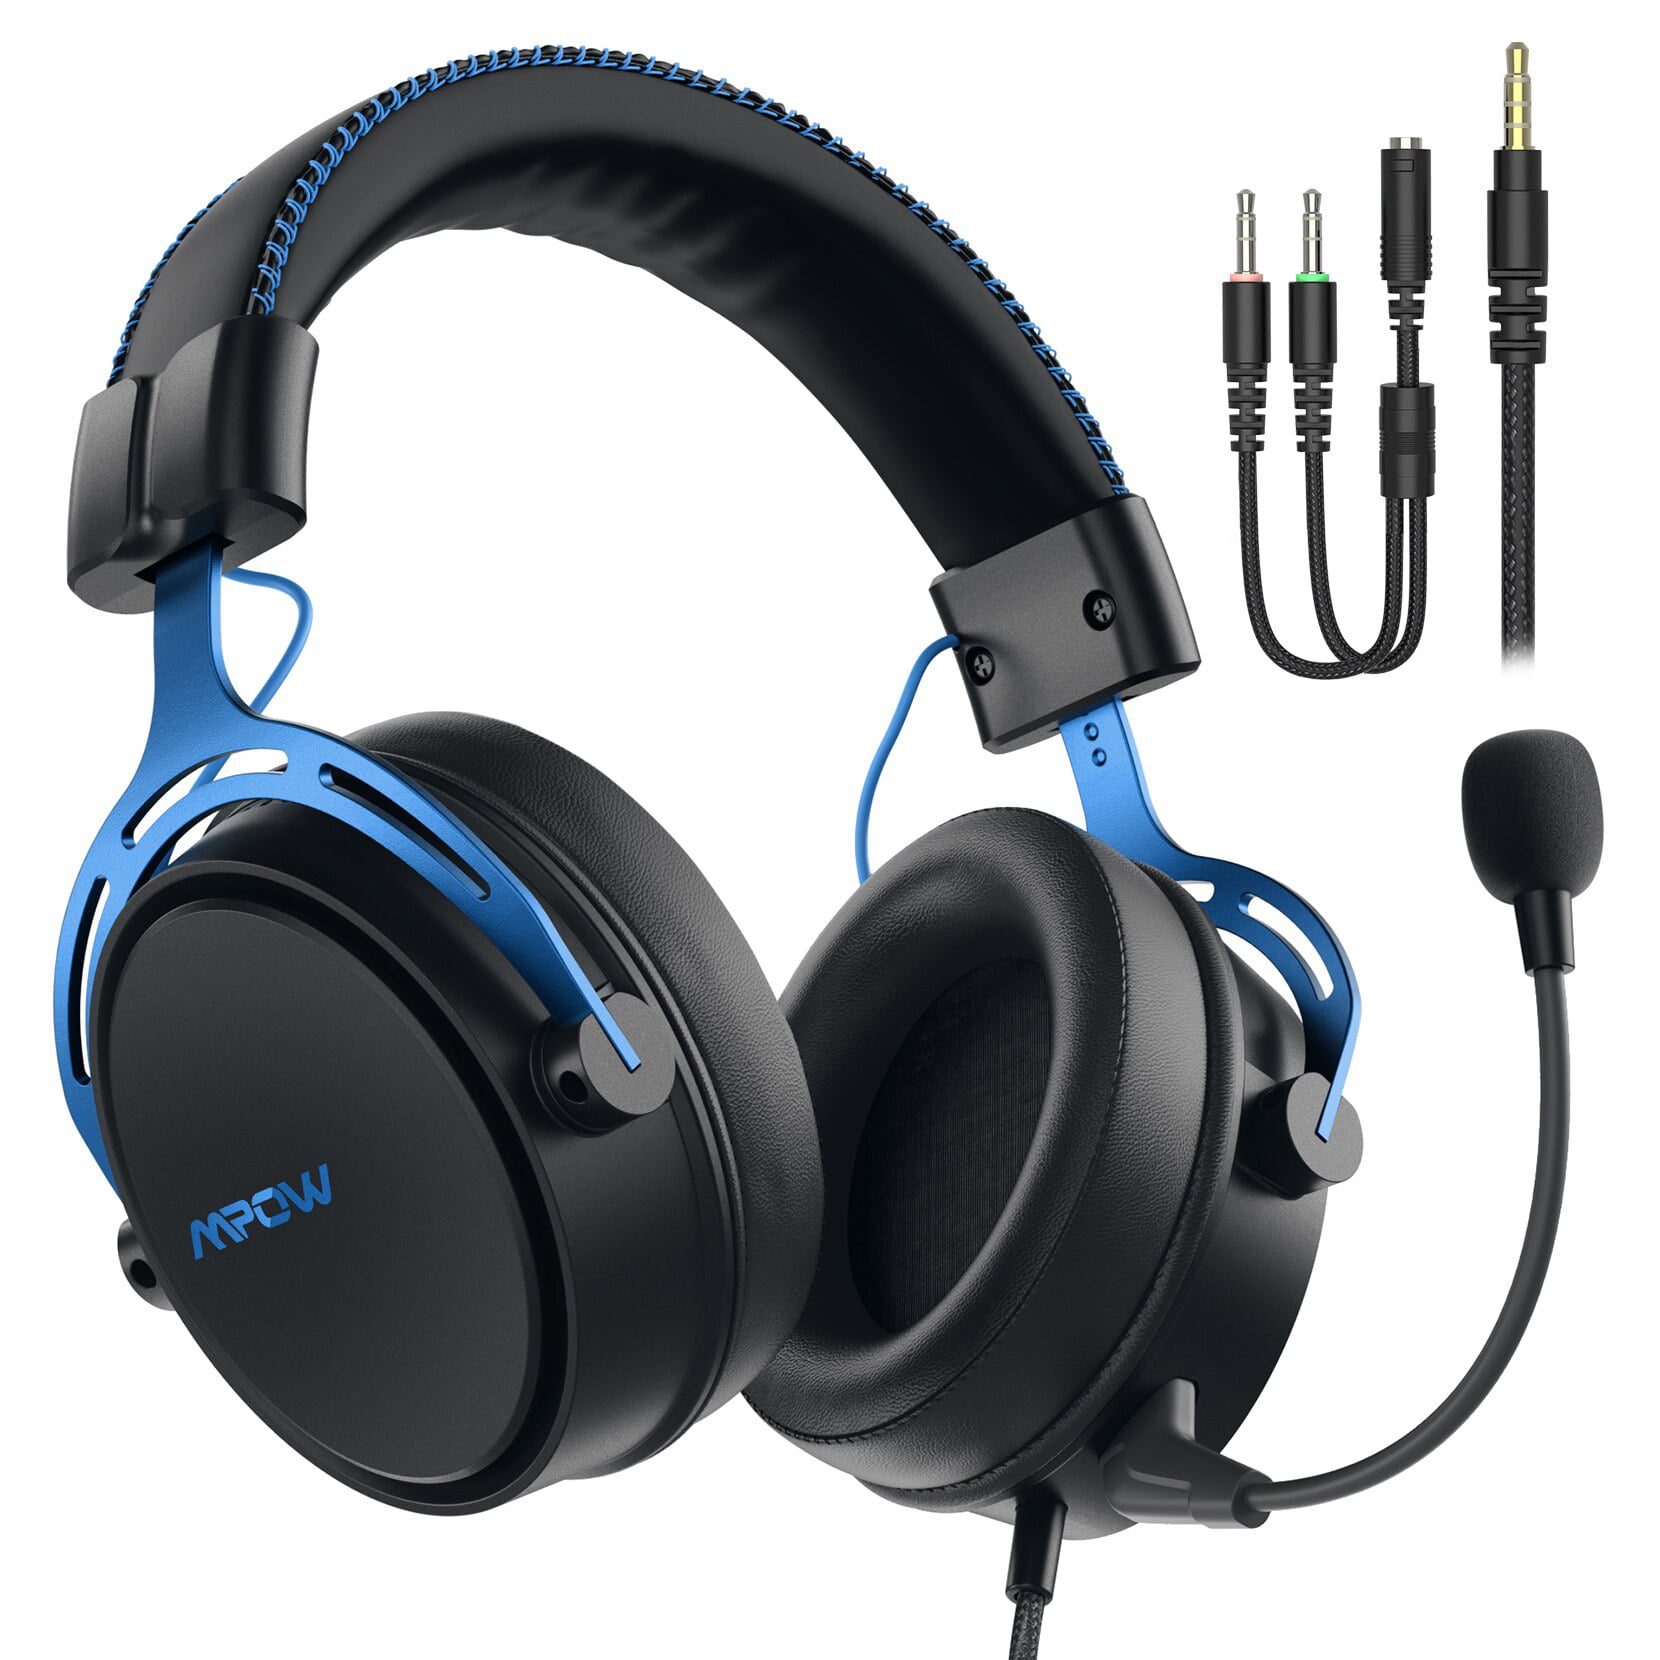 for PC and PS4 Noise Cancelling Microphone,Memory Foam Gaming Headphones 17-Hour of Wireless Use Included 3.5.mm Cable Mpow Air 2.4G Wireless Gaming Headset with Double Chamber Drivers - Blue 